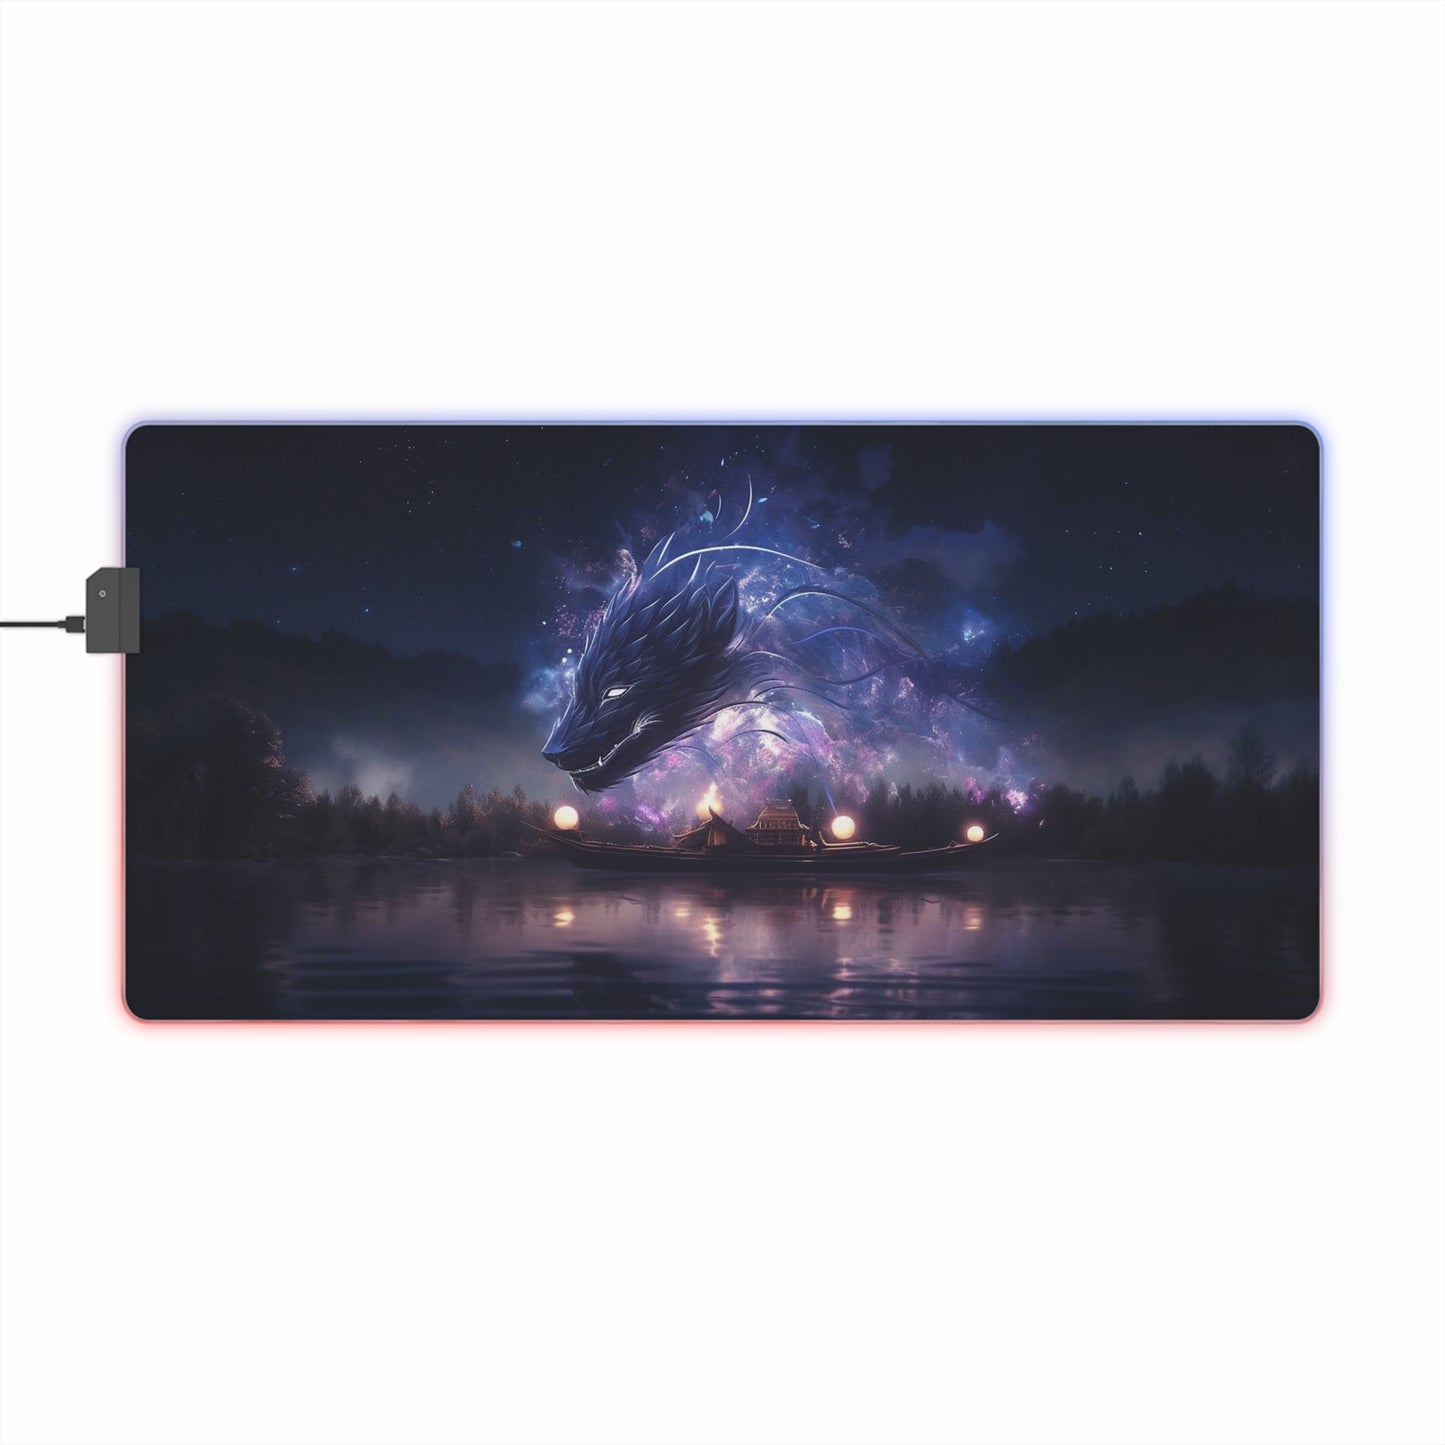 Spectral Guardian LED Gaming Mouse Pad